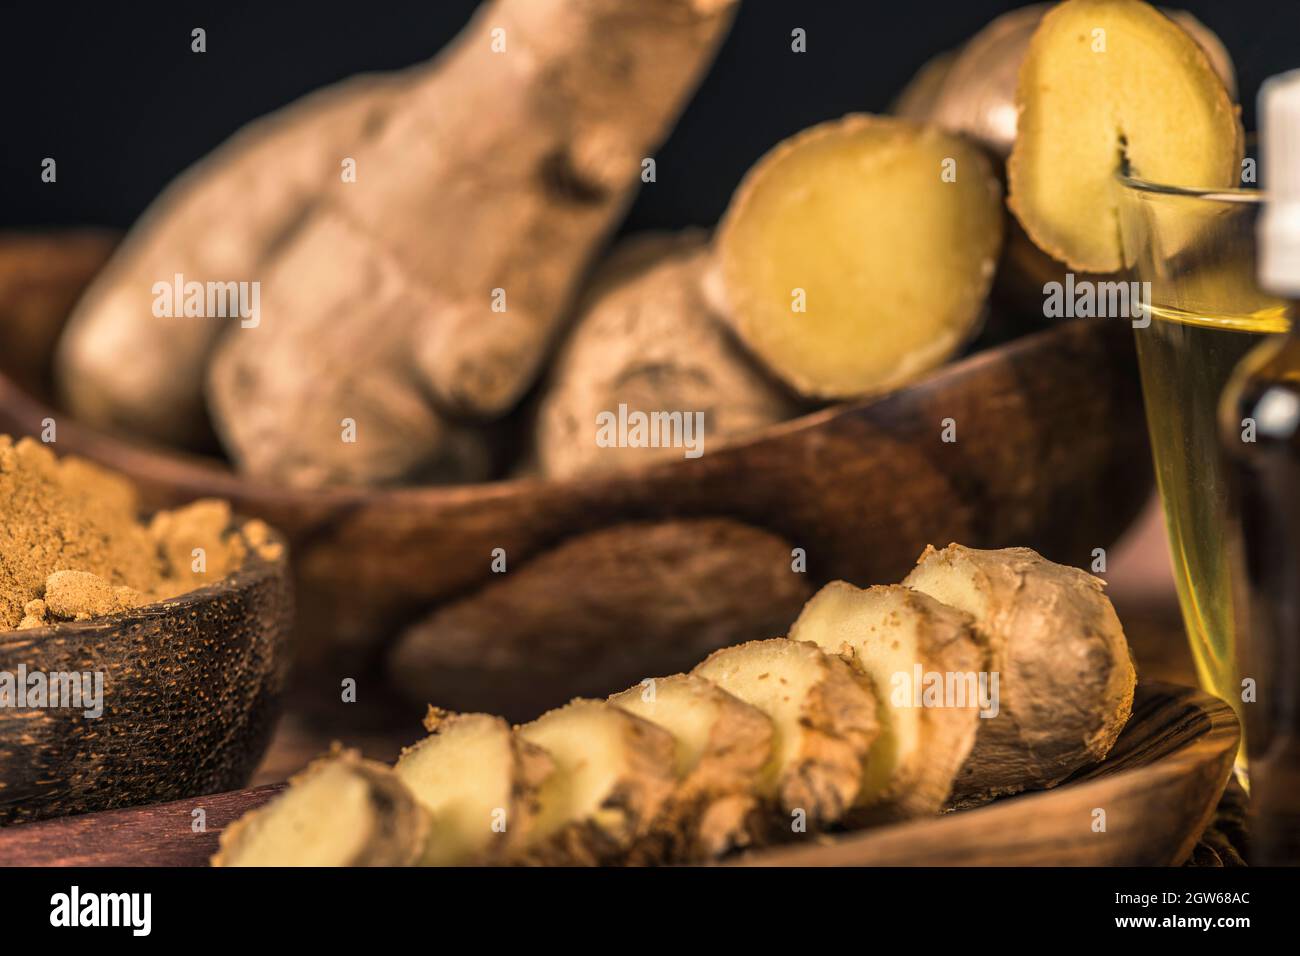 Sliced Ginger Root And Ginger Powder In The Bowl On The Table. Anti-inflammatory Herbal Medicine Stock Photo